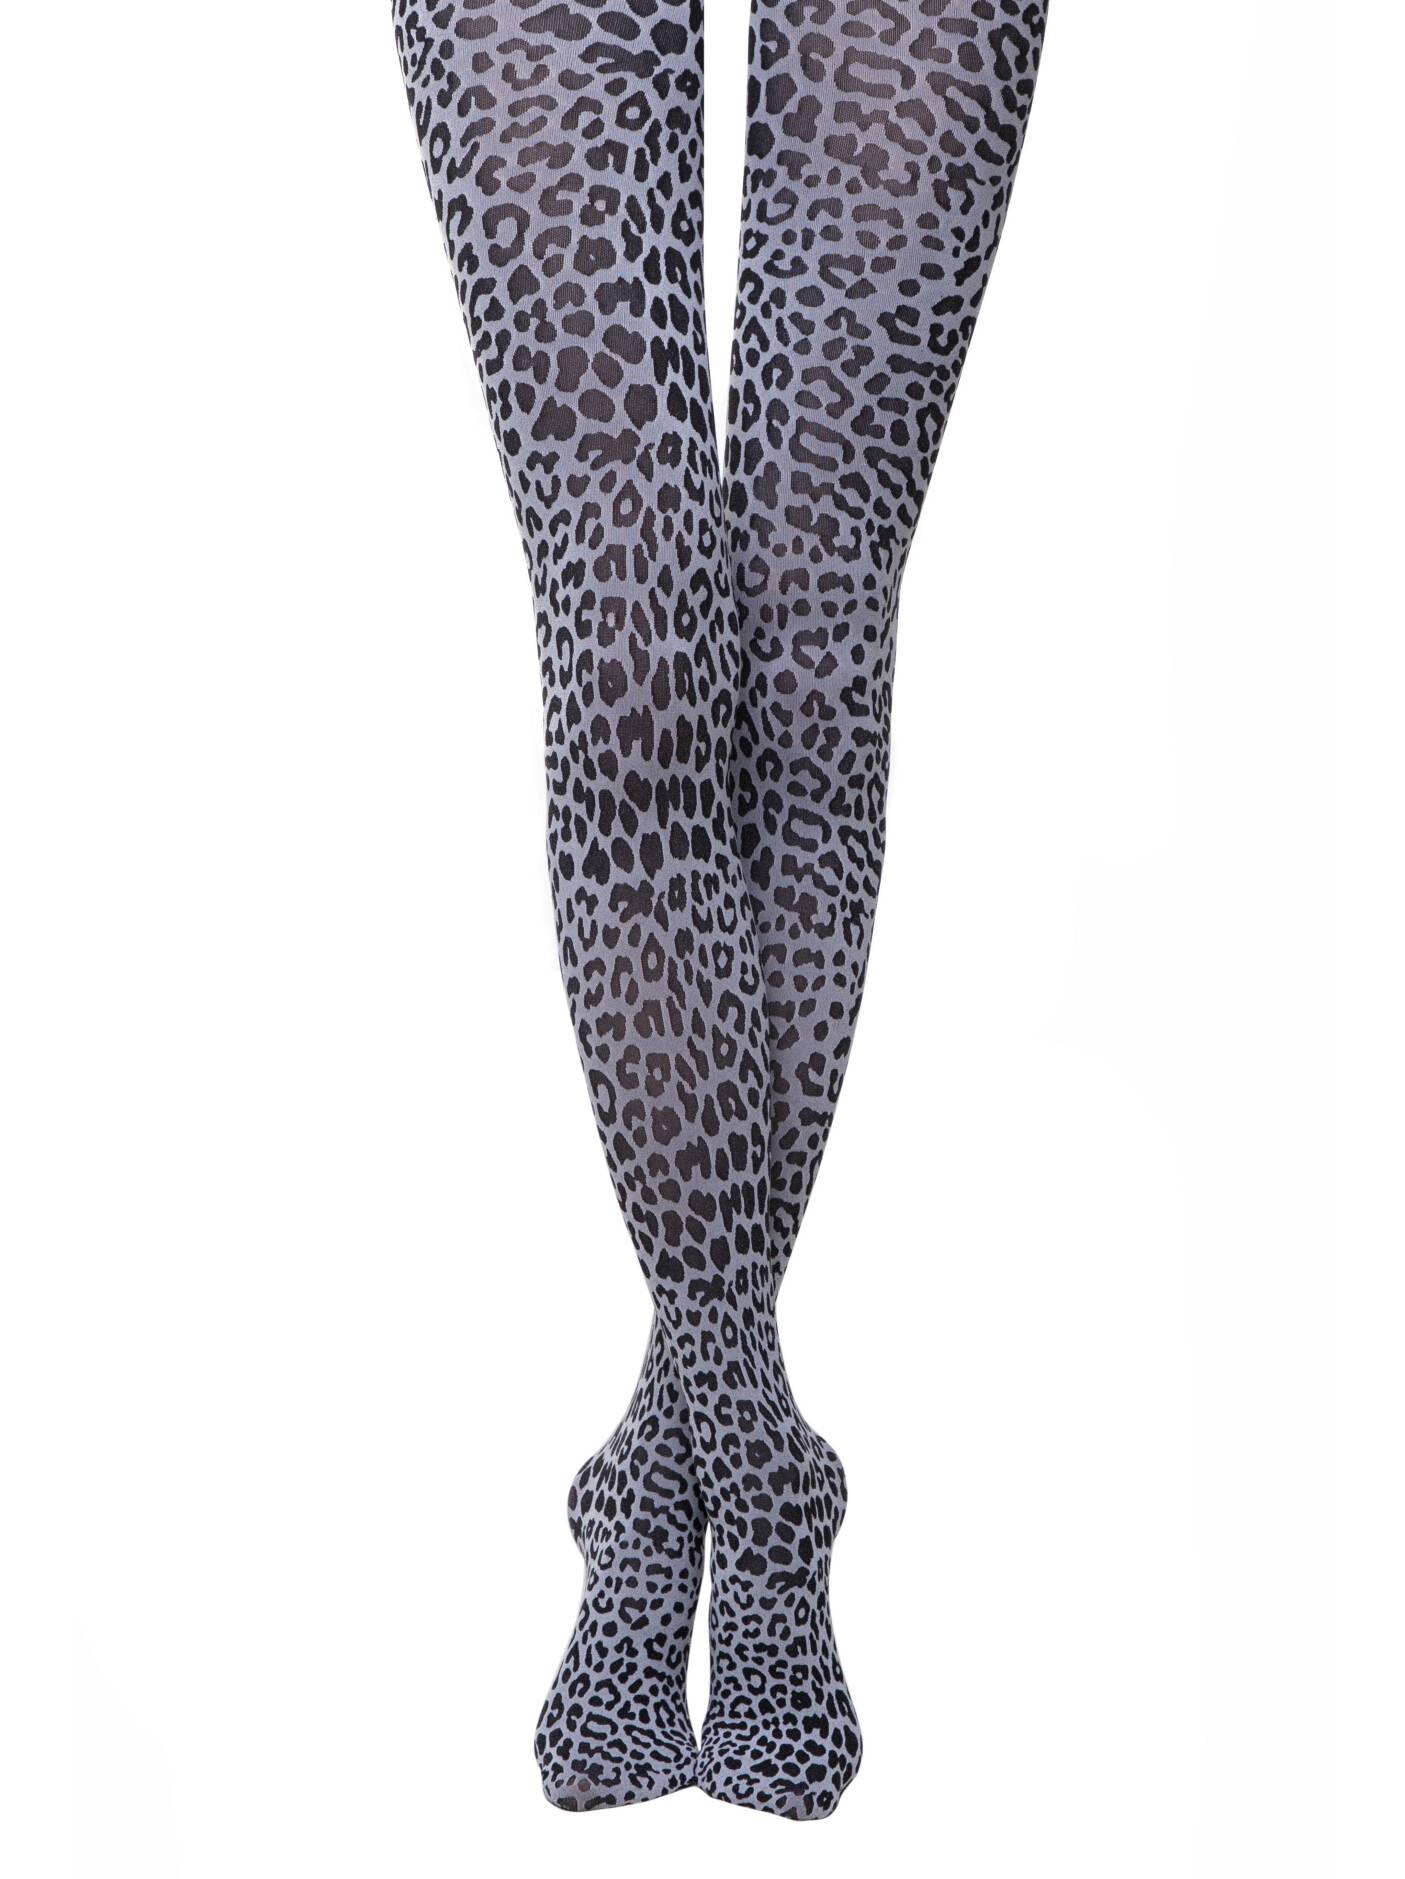 Lycra® Conte online Official LEO tights print Leopard - store